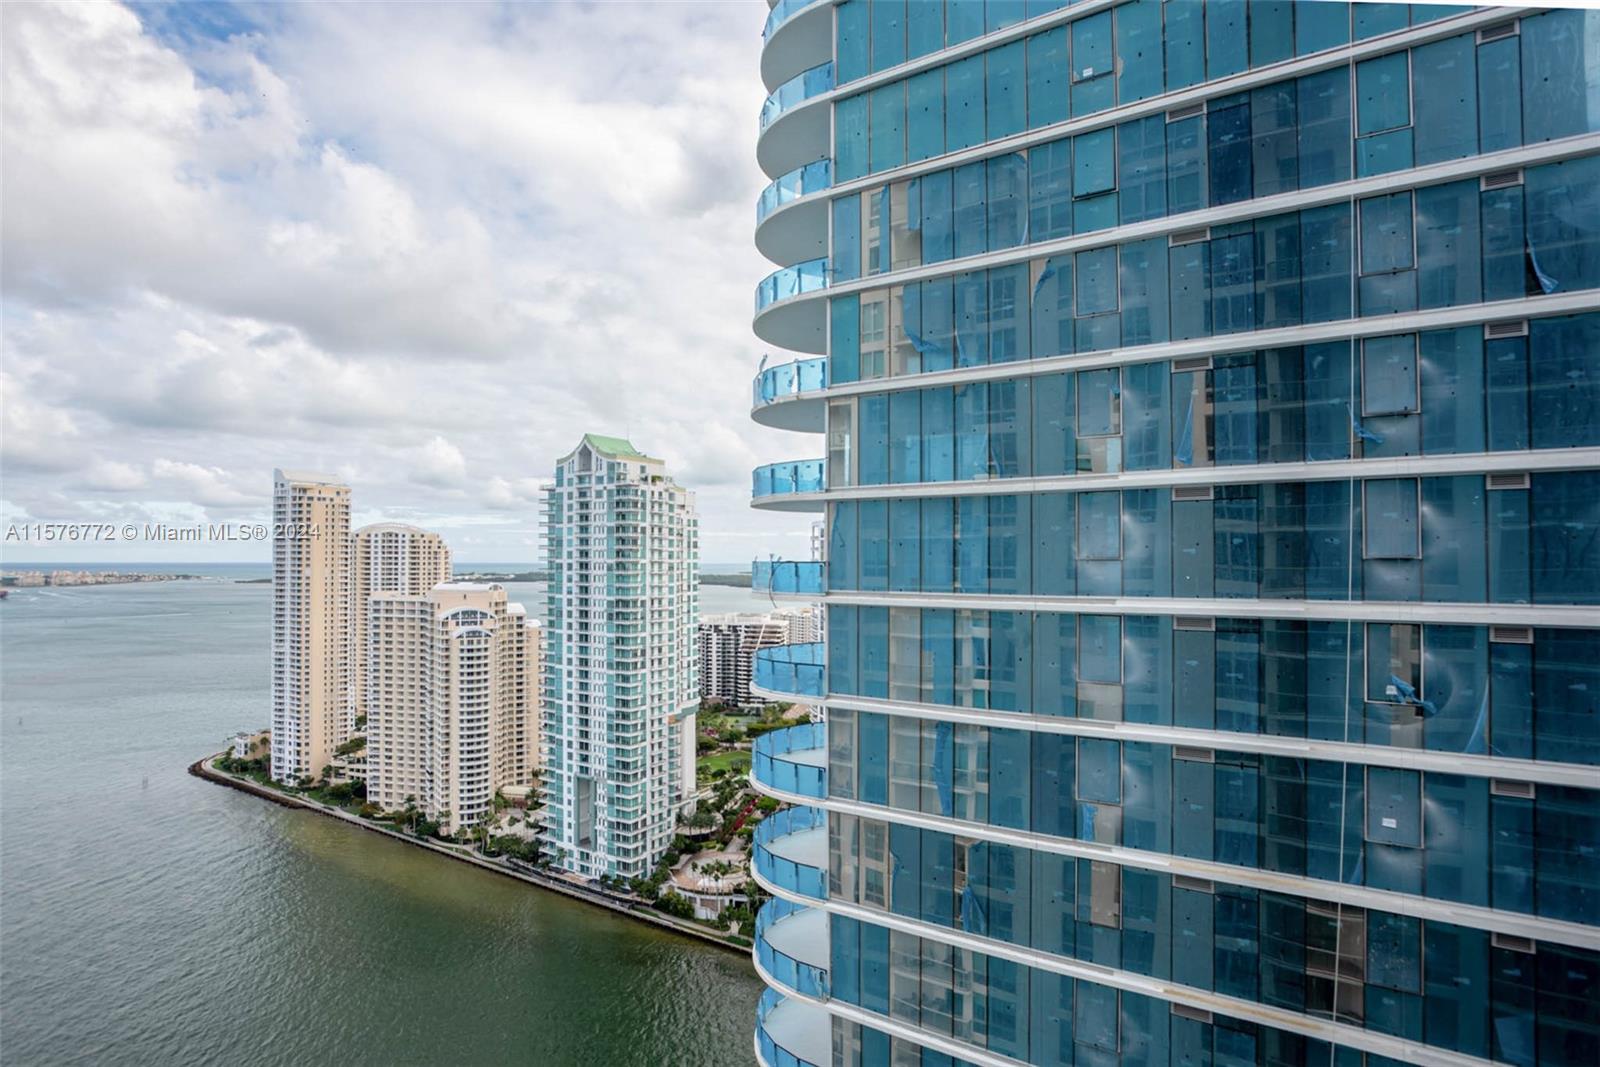 This is one of today's best locations in Miami. At the epicenter of Brickell and downtown's atmosphere.
Walking distance to everything like restaurants, theatres, sports and many more activities that Miami has to offer. This unit is ready to move in and/or a tenant in place month to month in case for investors.
Unit has carpet. All offers will be considered and, if necessary, sellers can upgrade floors for a difference to be consider. High floors like this are rare to get at standard prices.